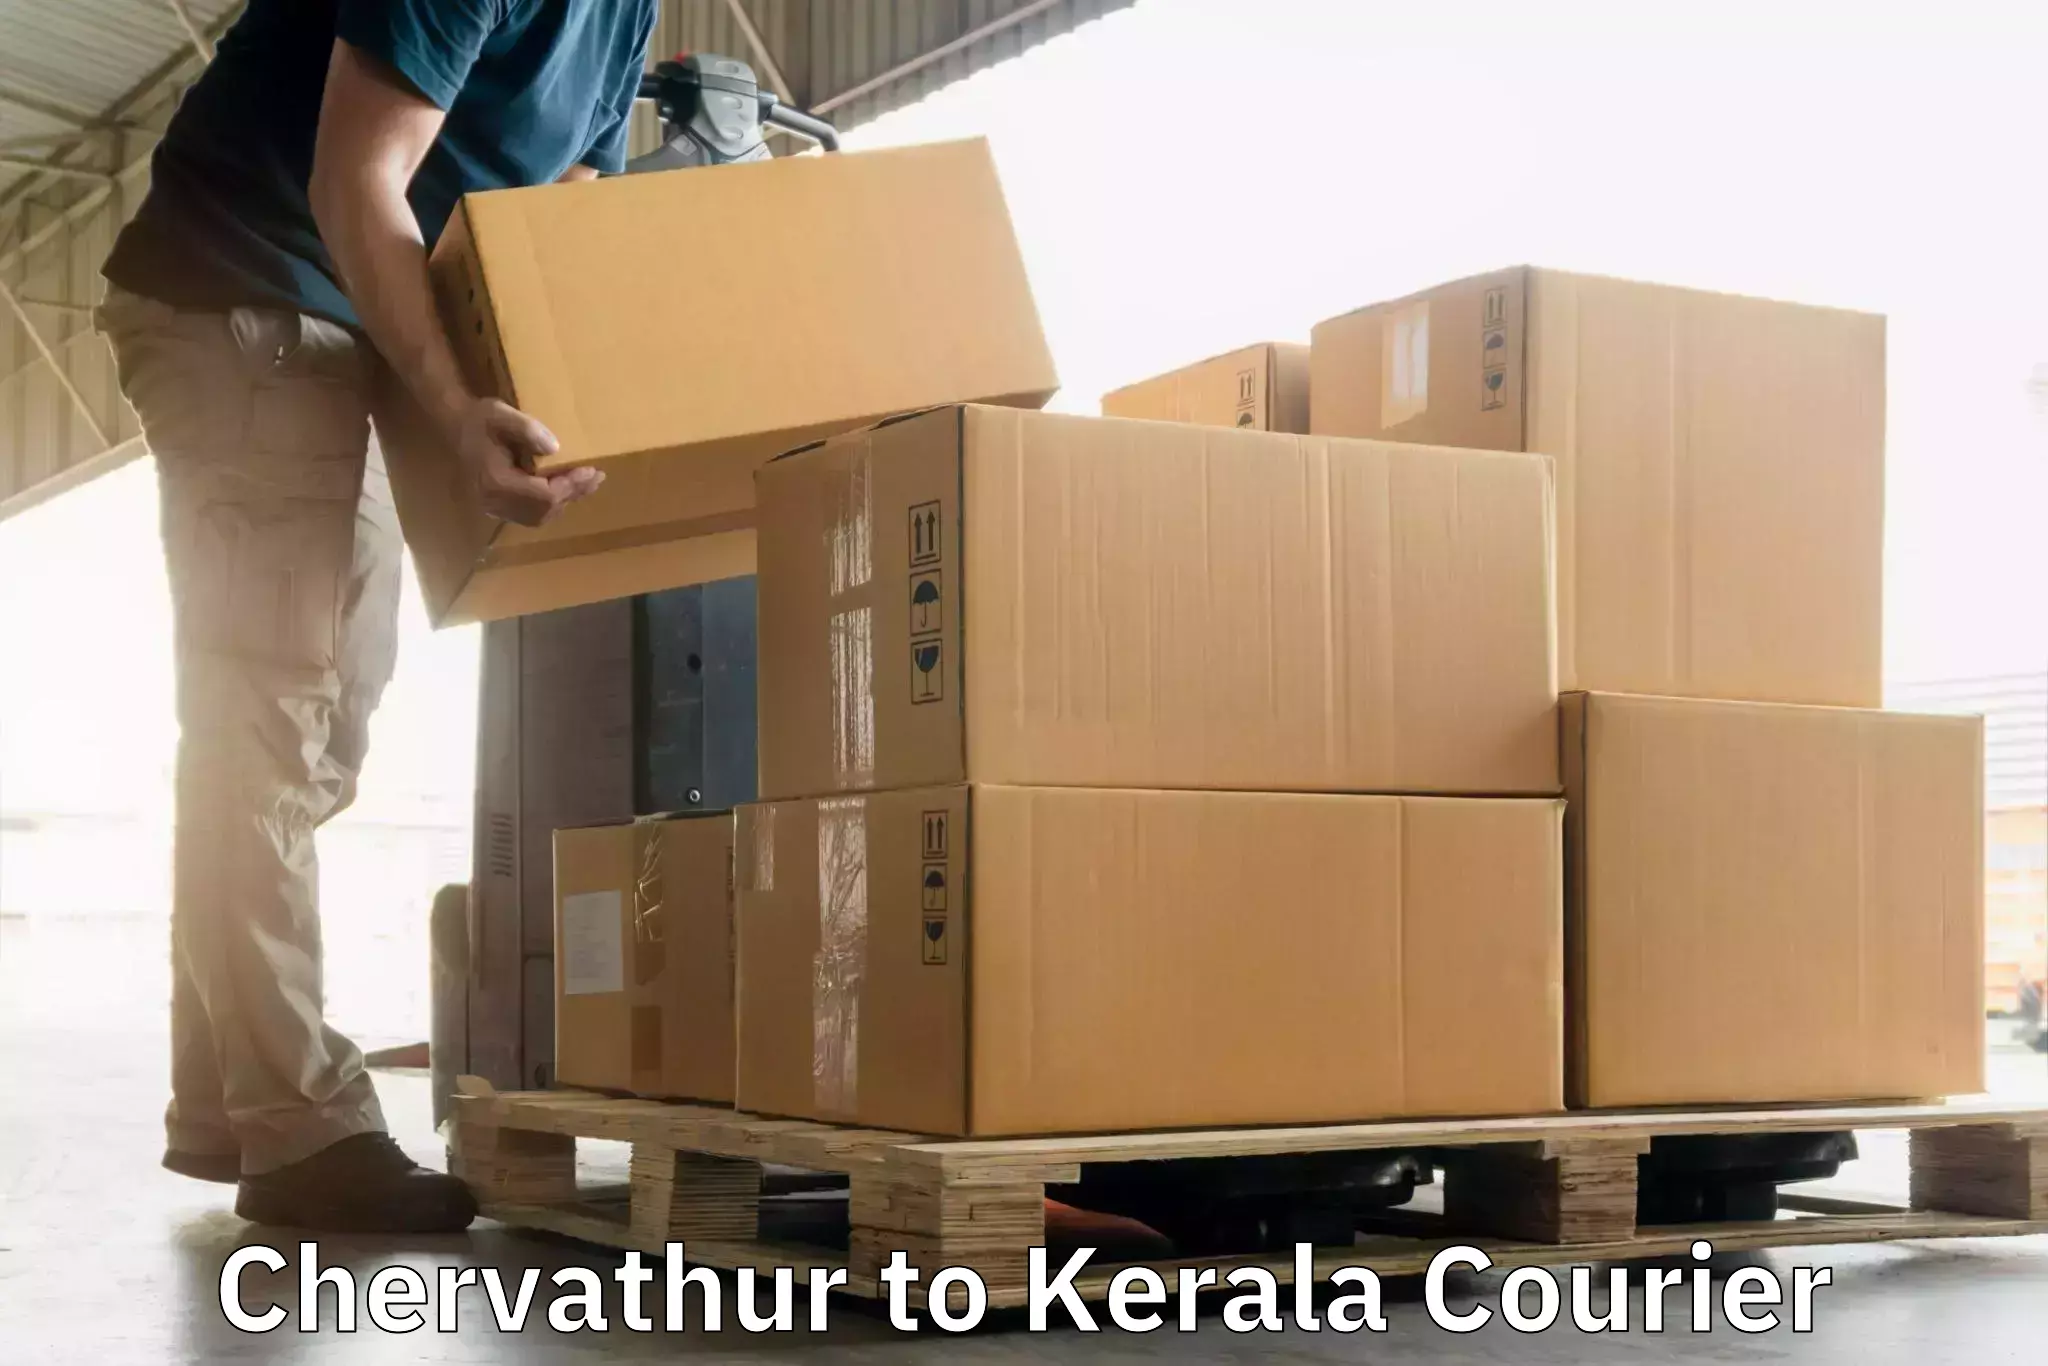 Modern courier technology Chervathur to Mahe